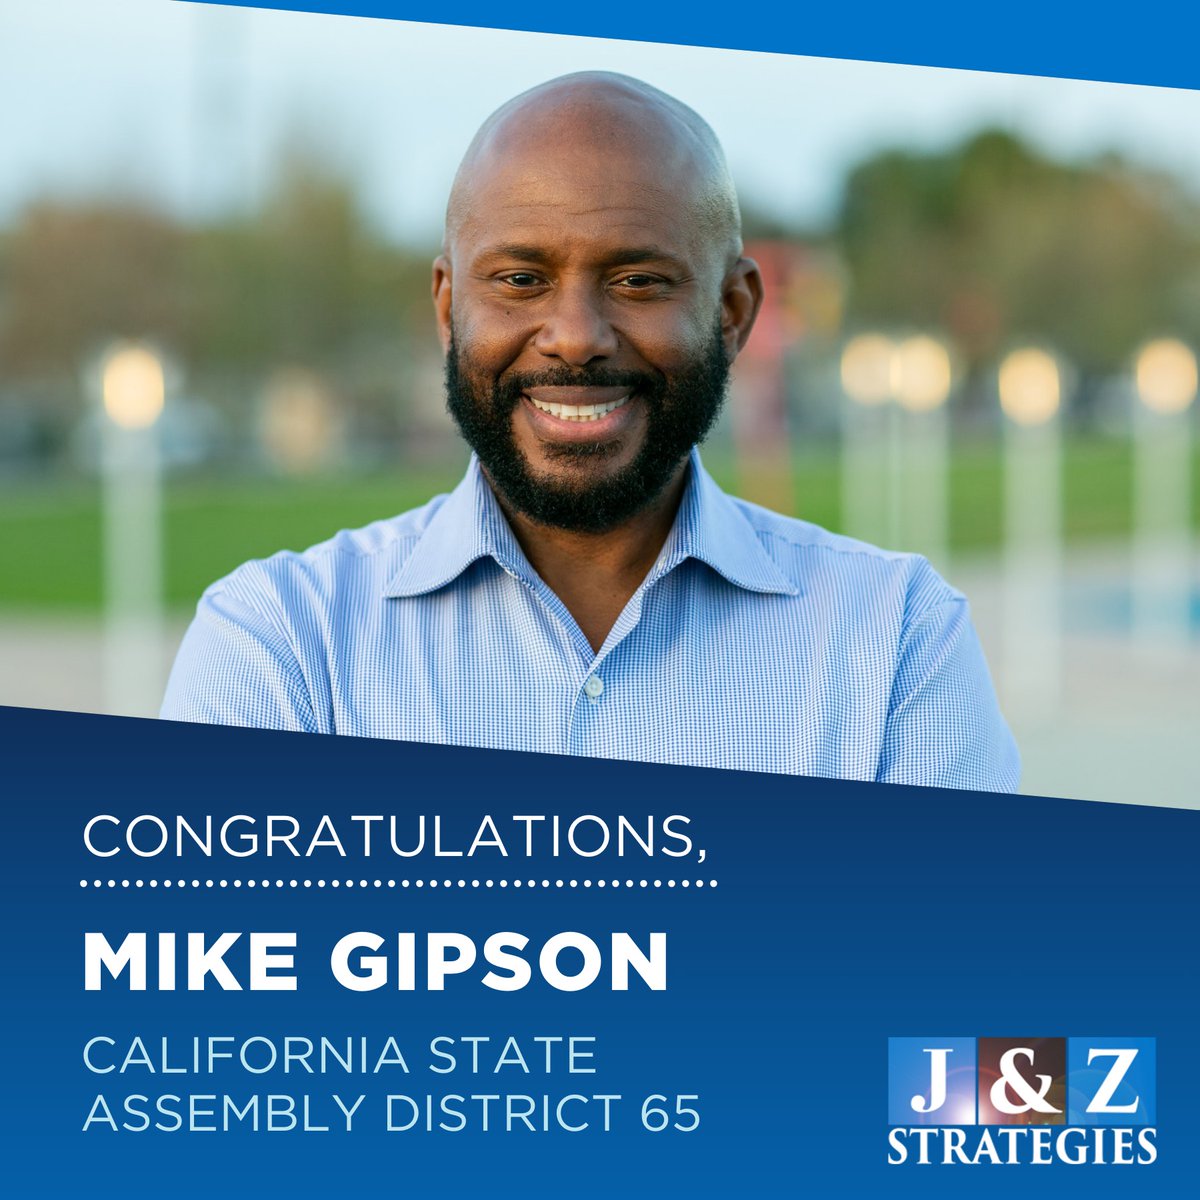 @envirovoters @eqca @RickChavezZbur @JohnBauters Congratulations to @mgipson2014 on earning 100% of the vote in his 2024 primary election!